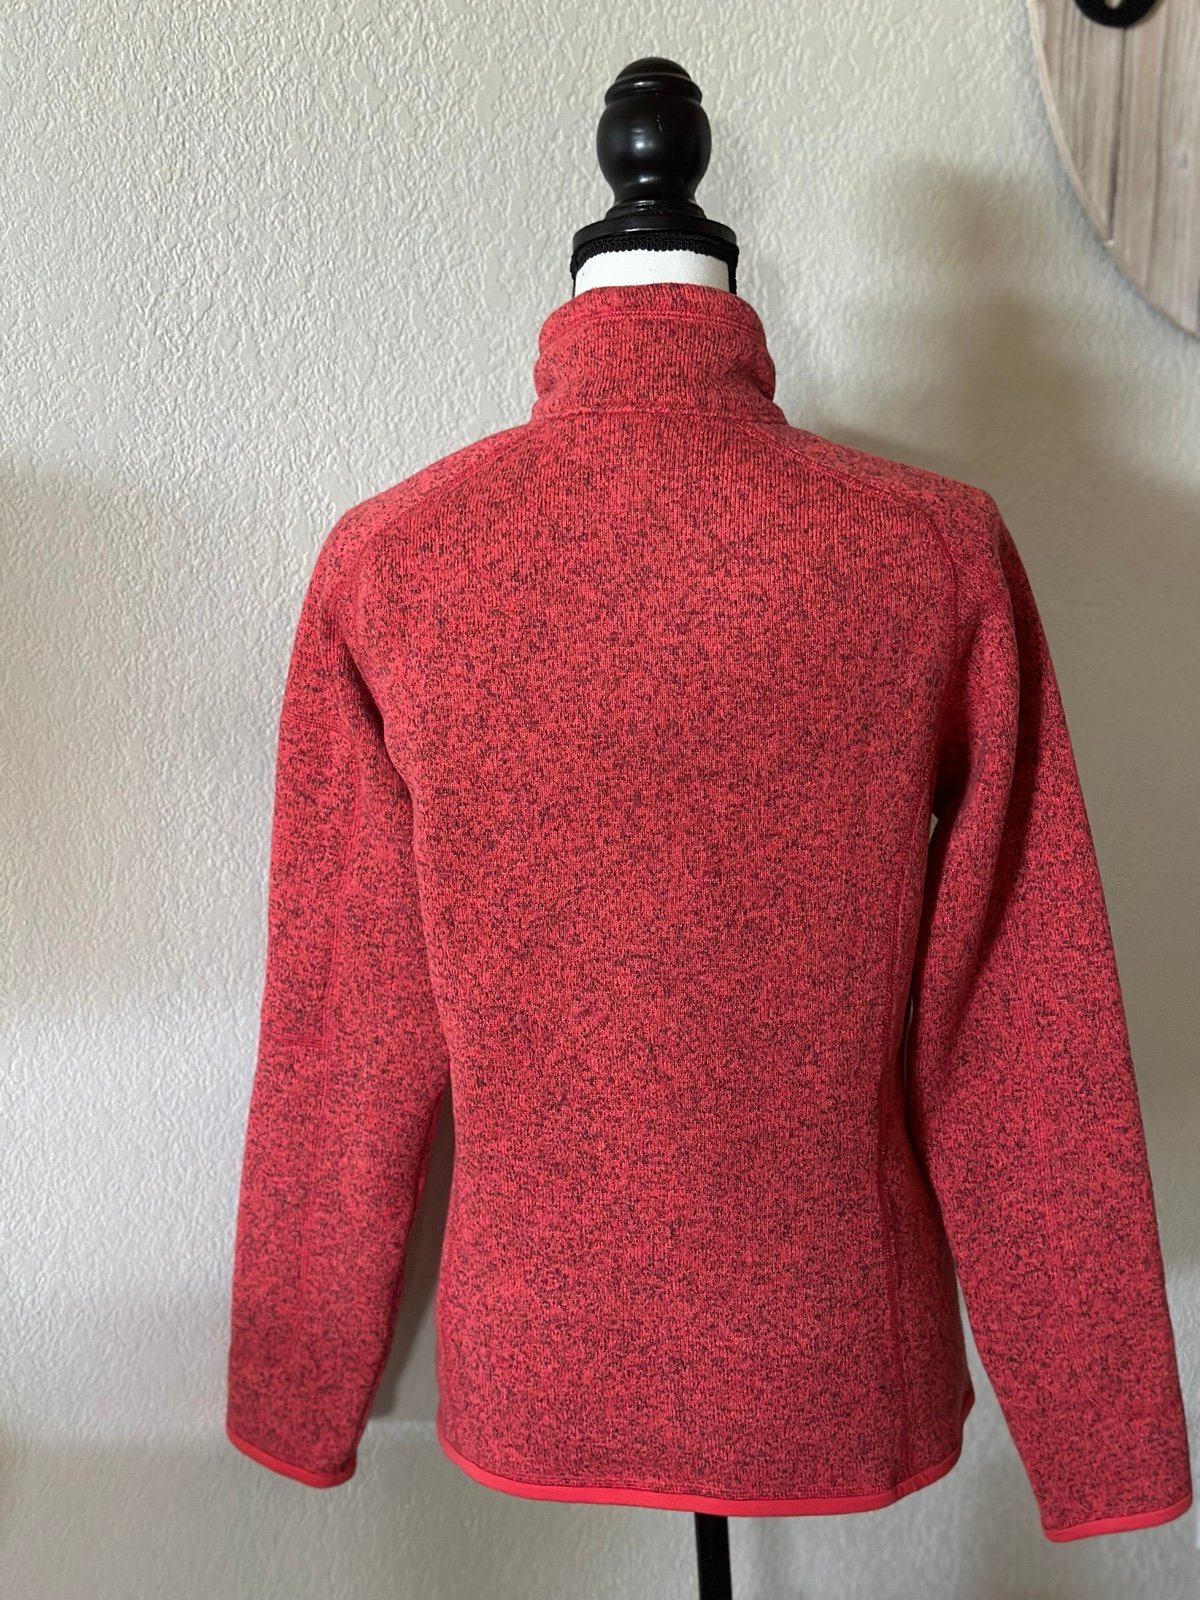 Stylish Patagonia Better Sweater 1/4” Zip Pullover L0Z7uqz0P on sale